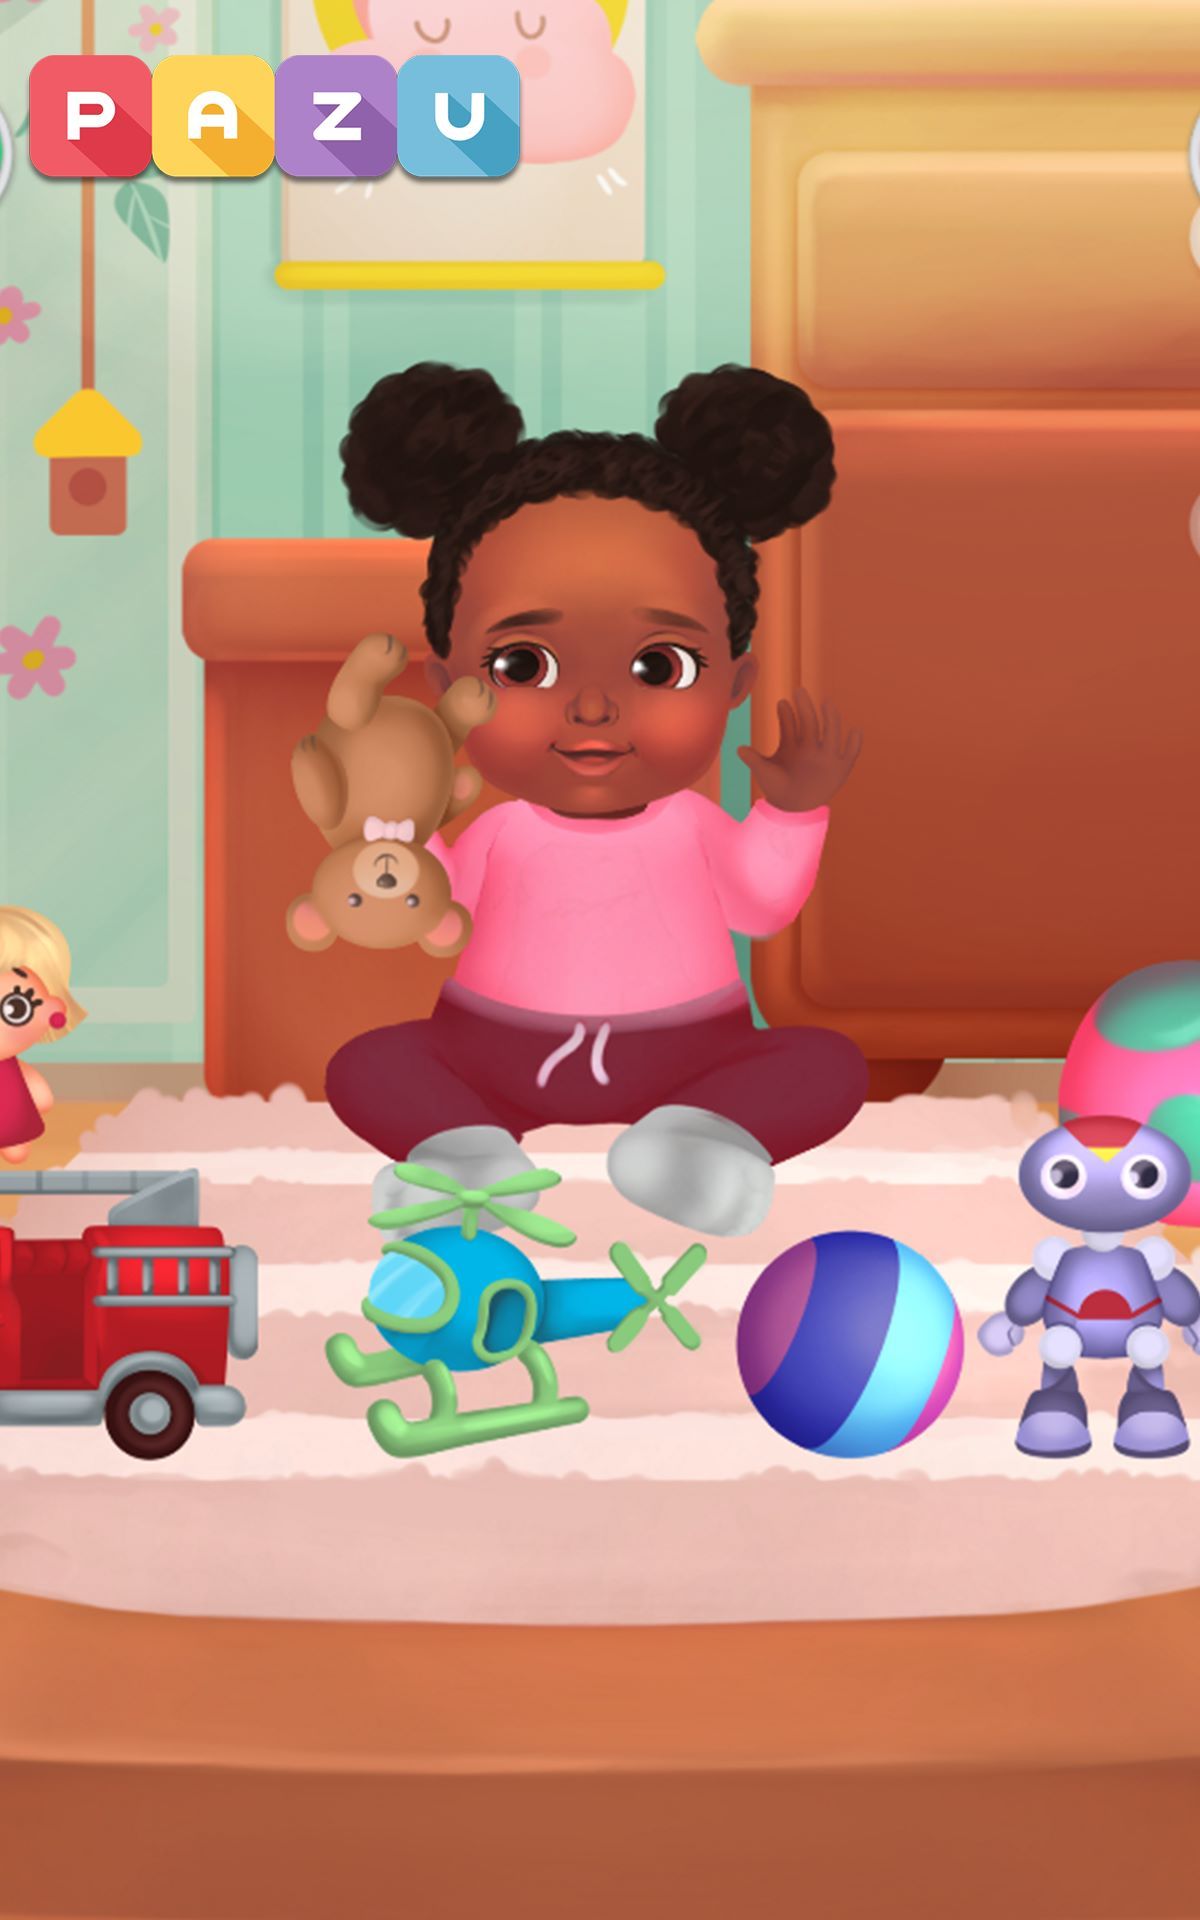 Baby care game & Dress up for toddlers